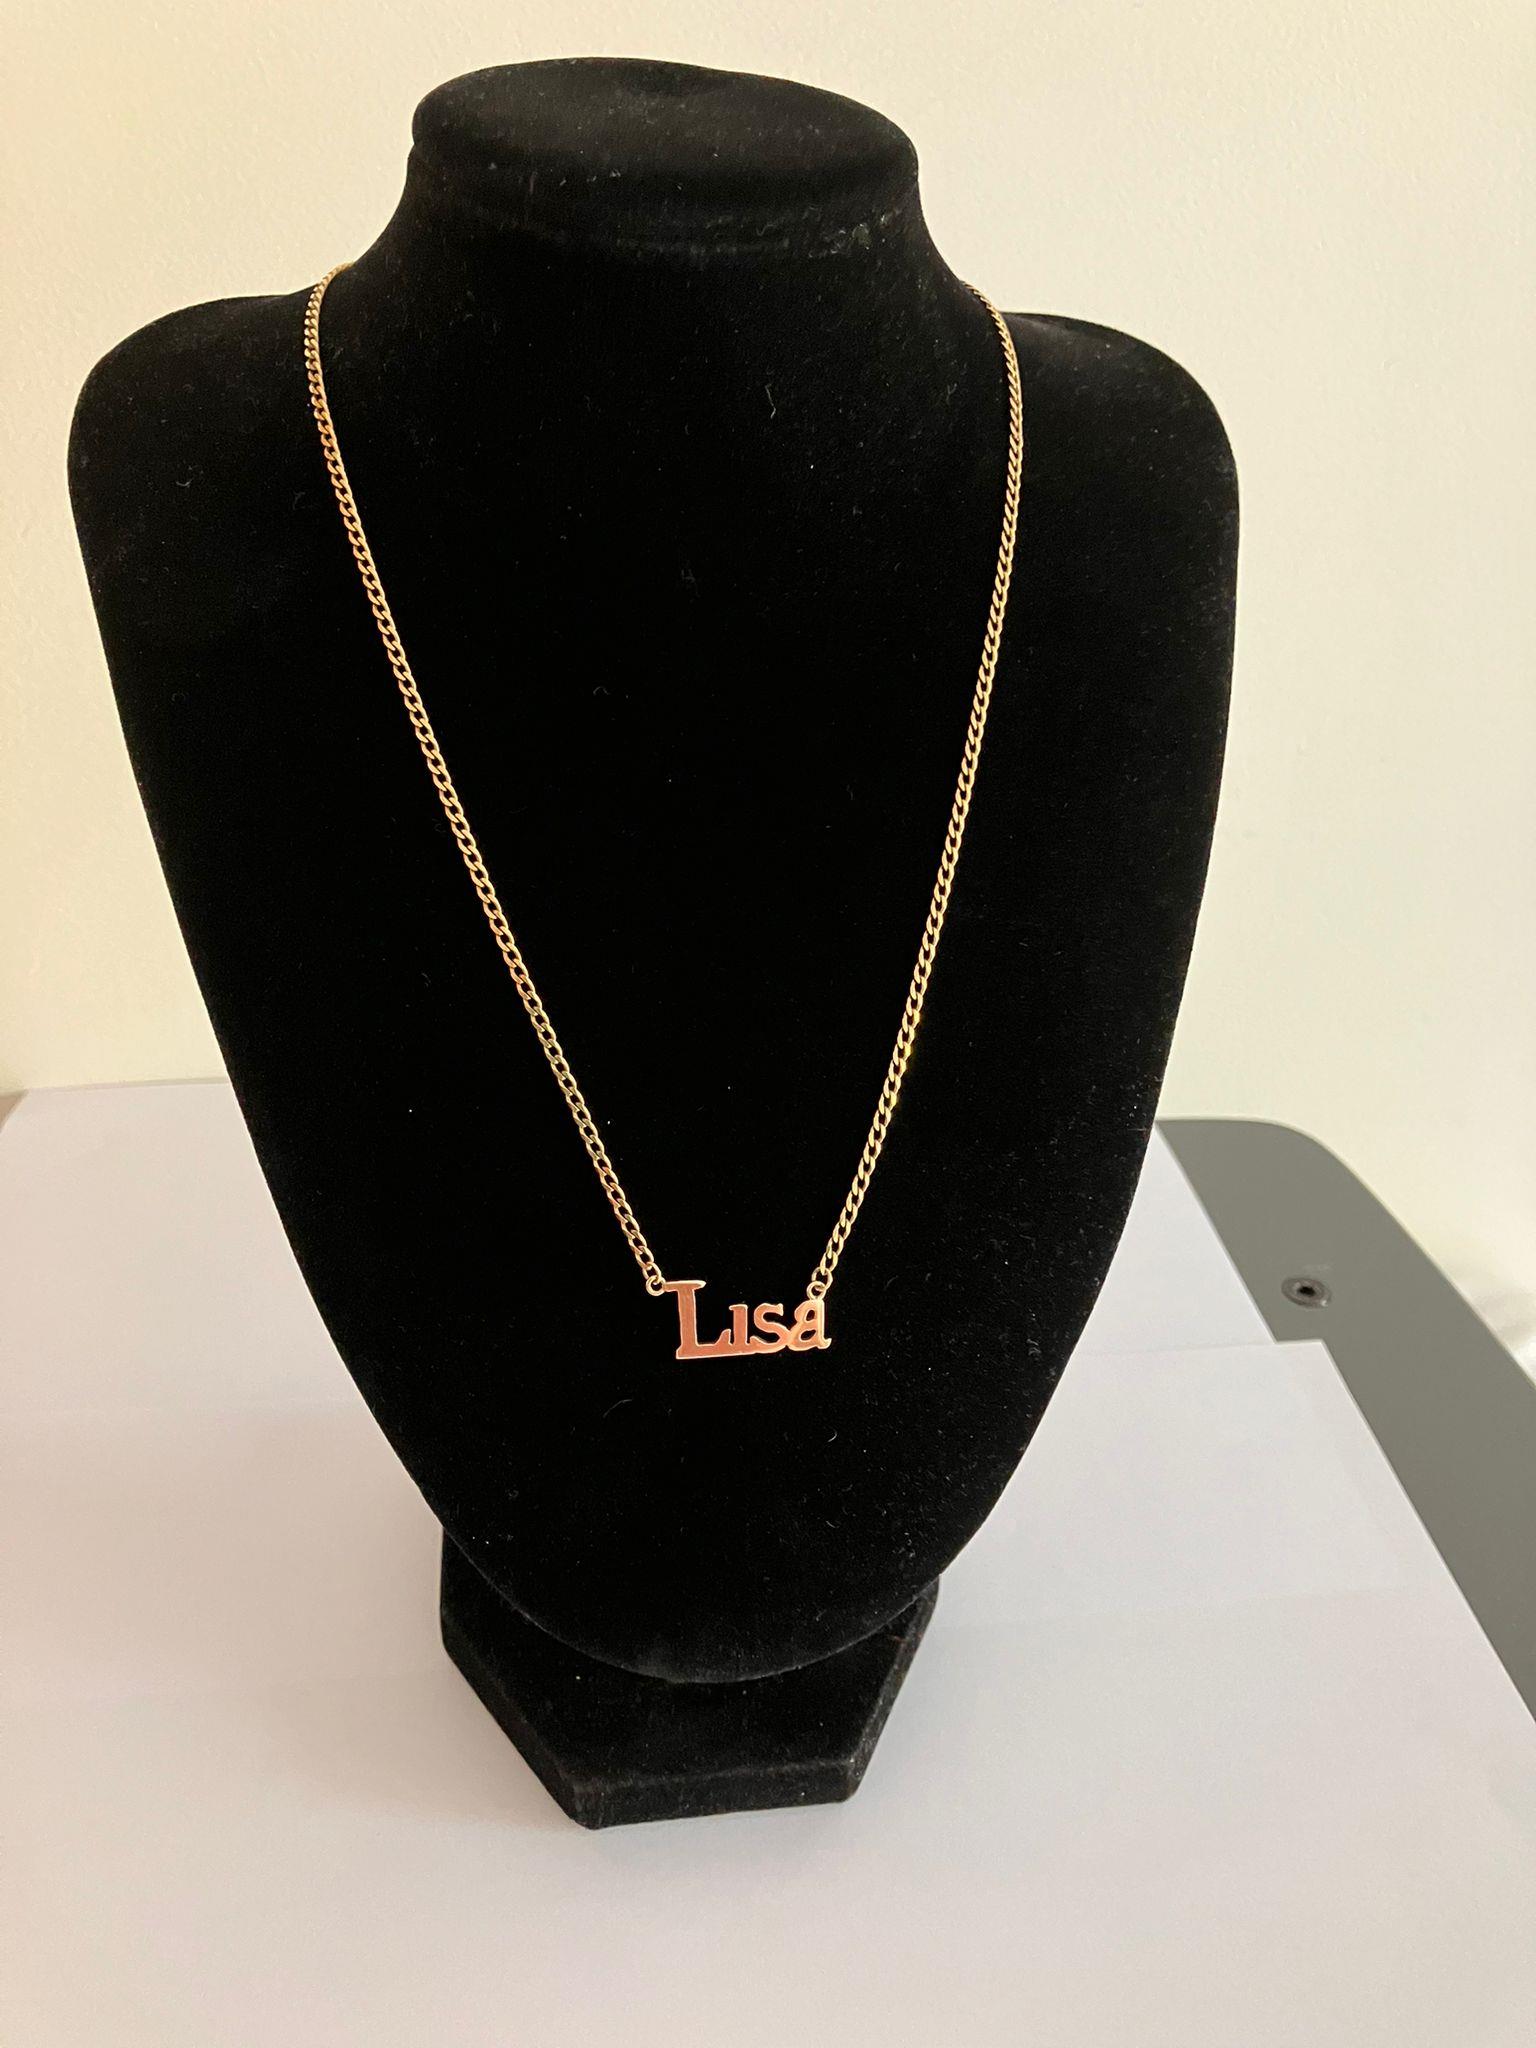 9 carat GOLD, CURB CHAIN NECKLACE with name of LISA. Full UK hallmark. 5.7 grams. 46 cm. - Image 7 of 11